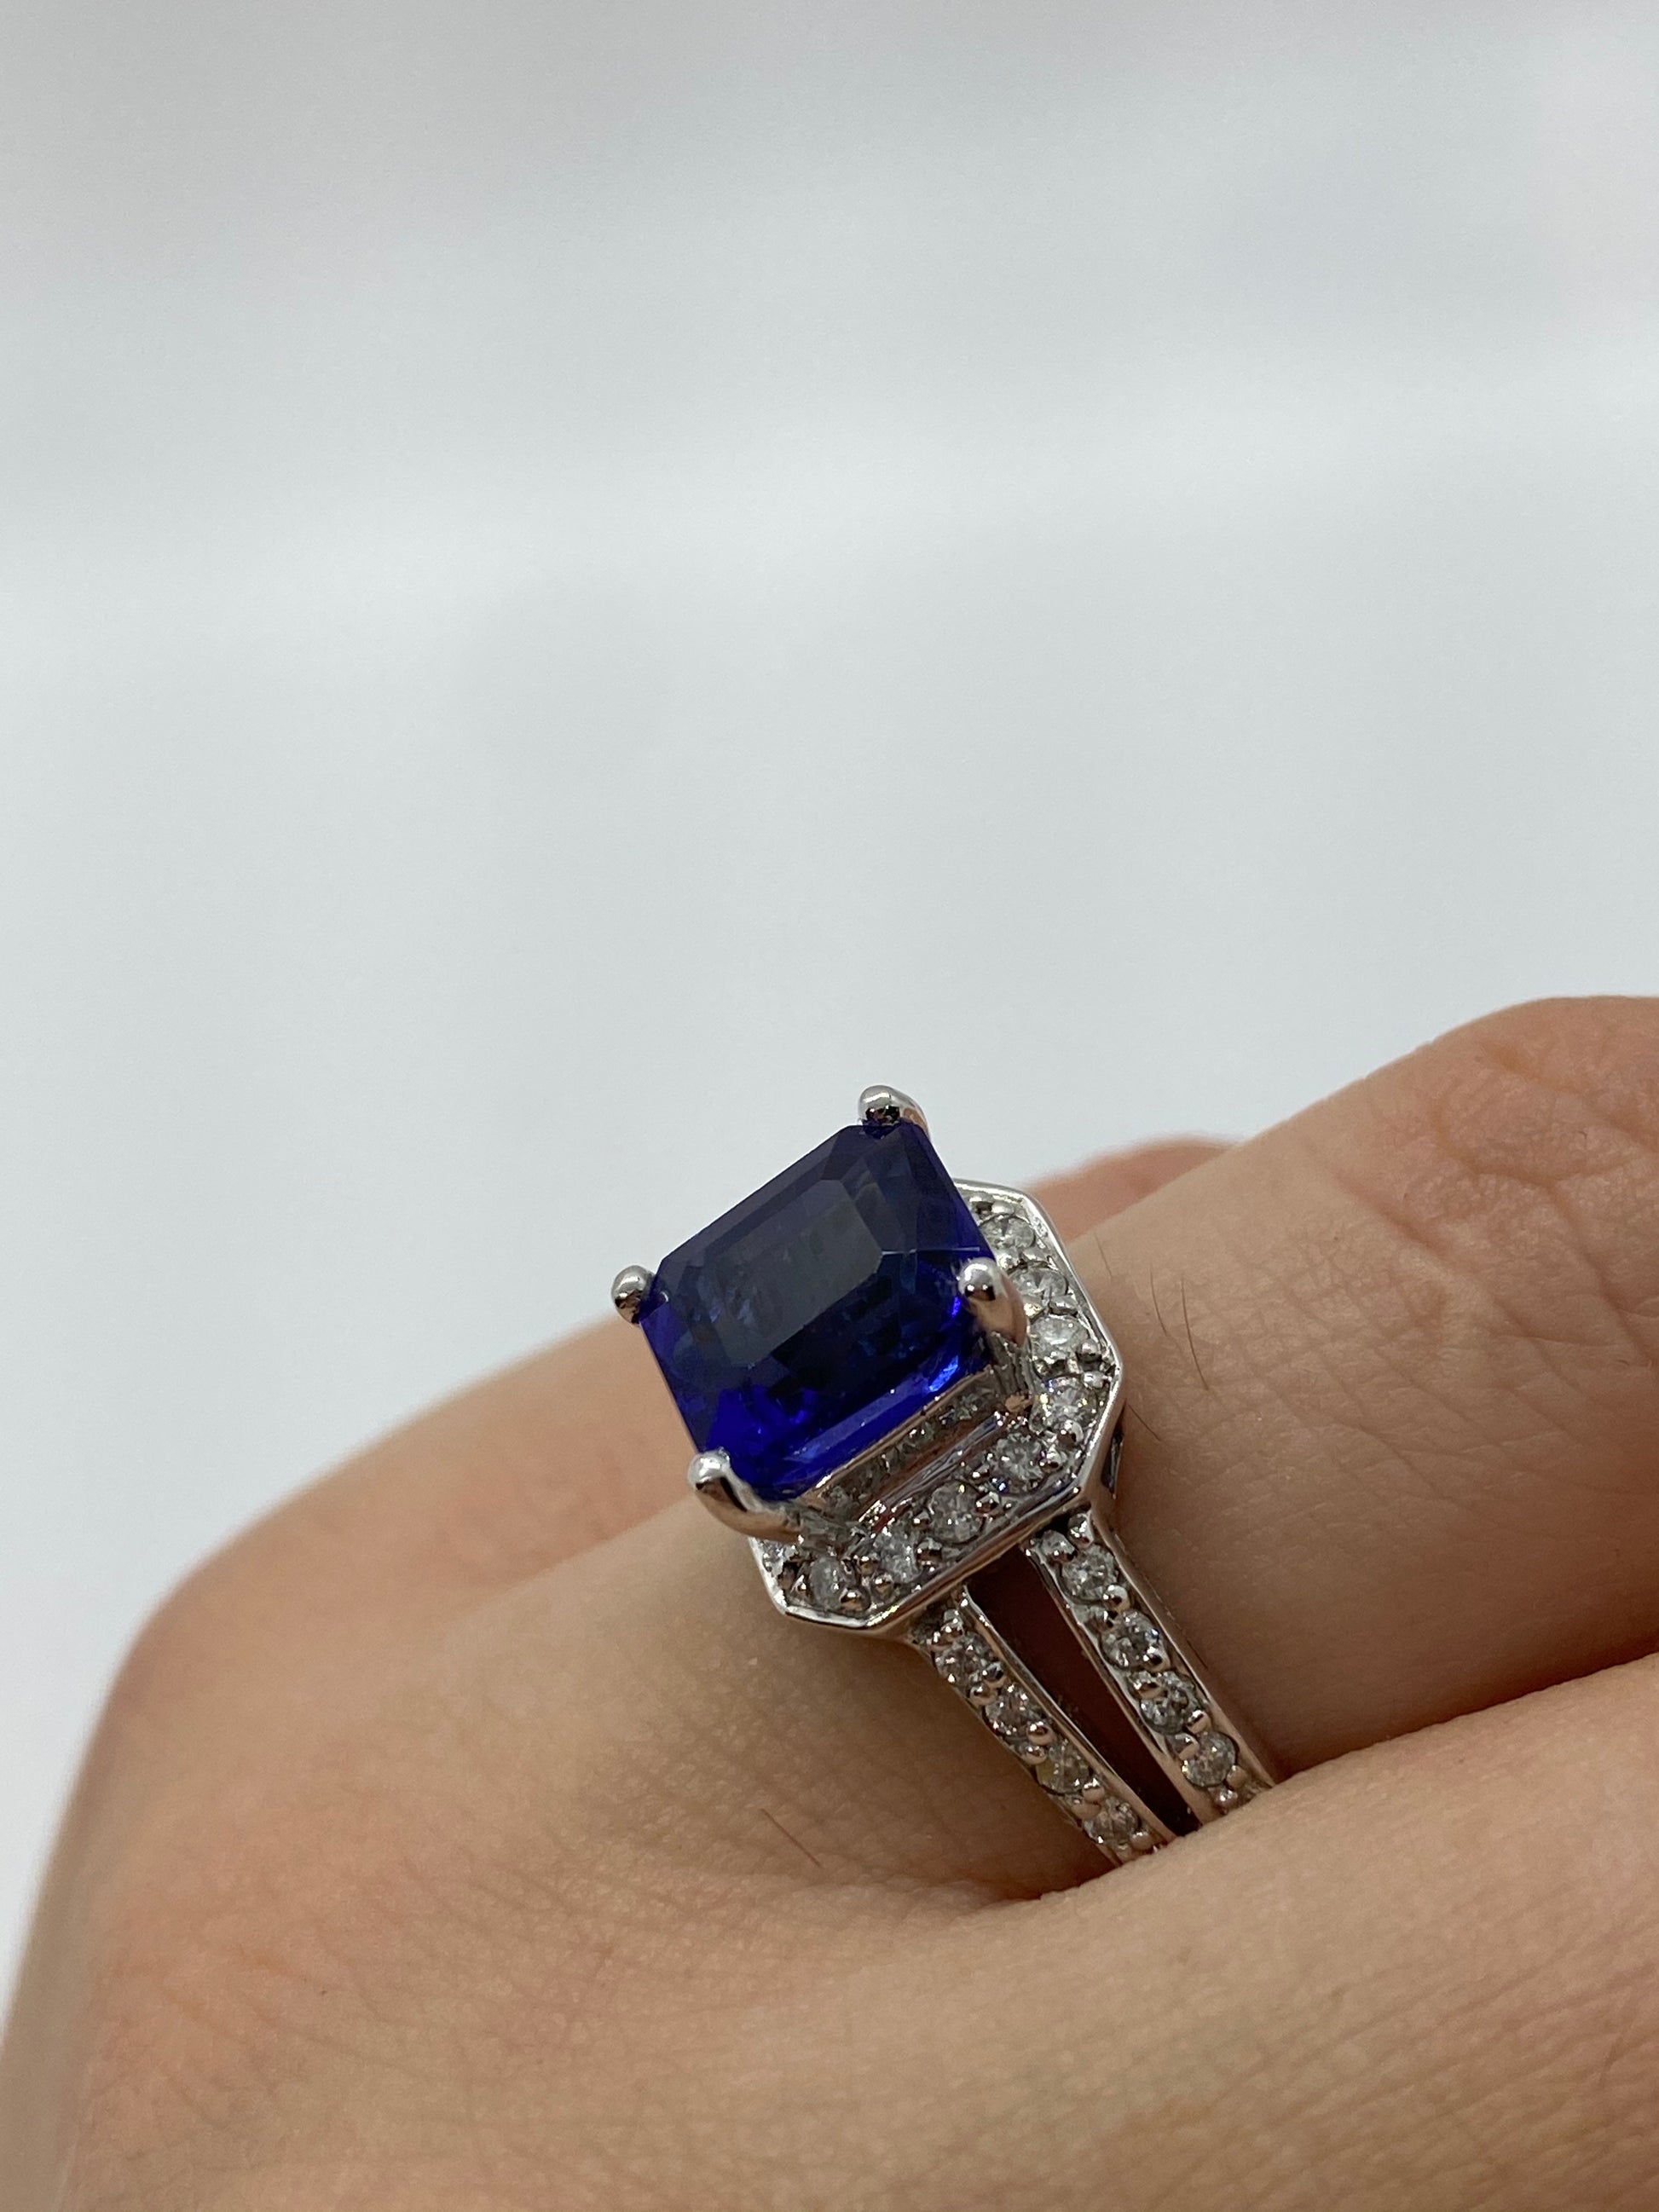 Tanzanite Ring R13135 - Royal Gems and Jewelry